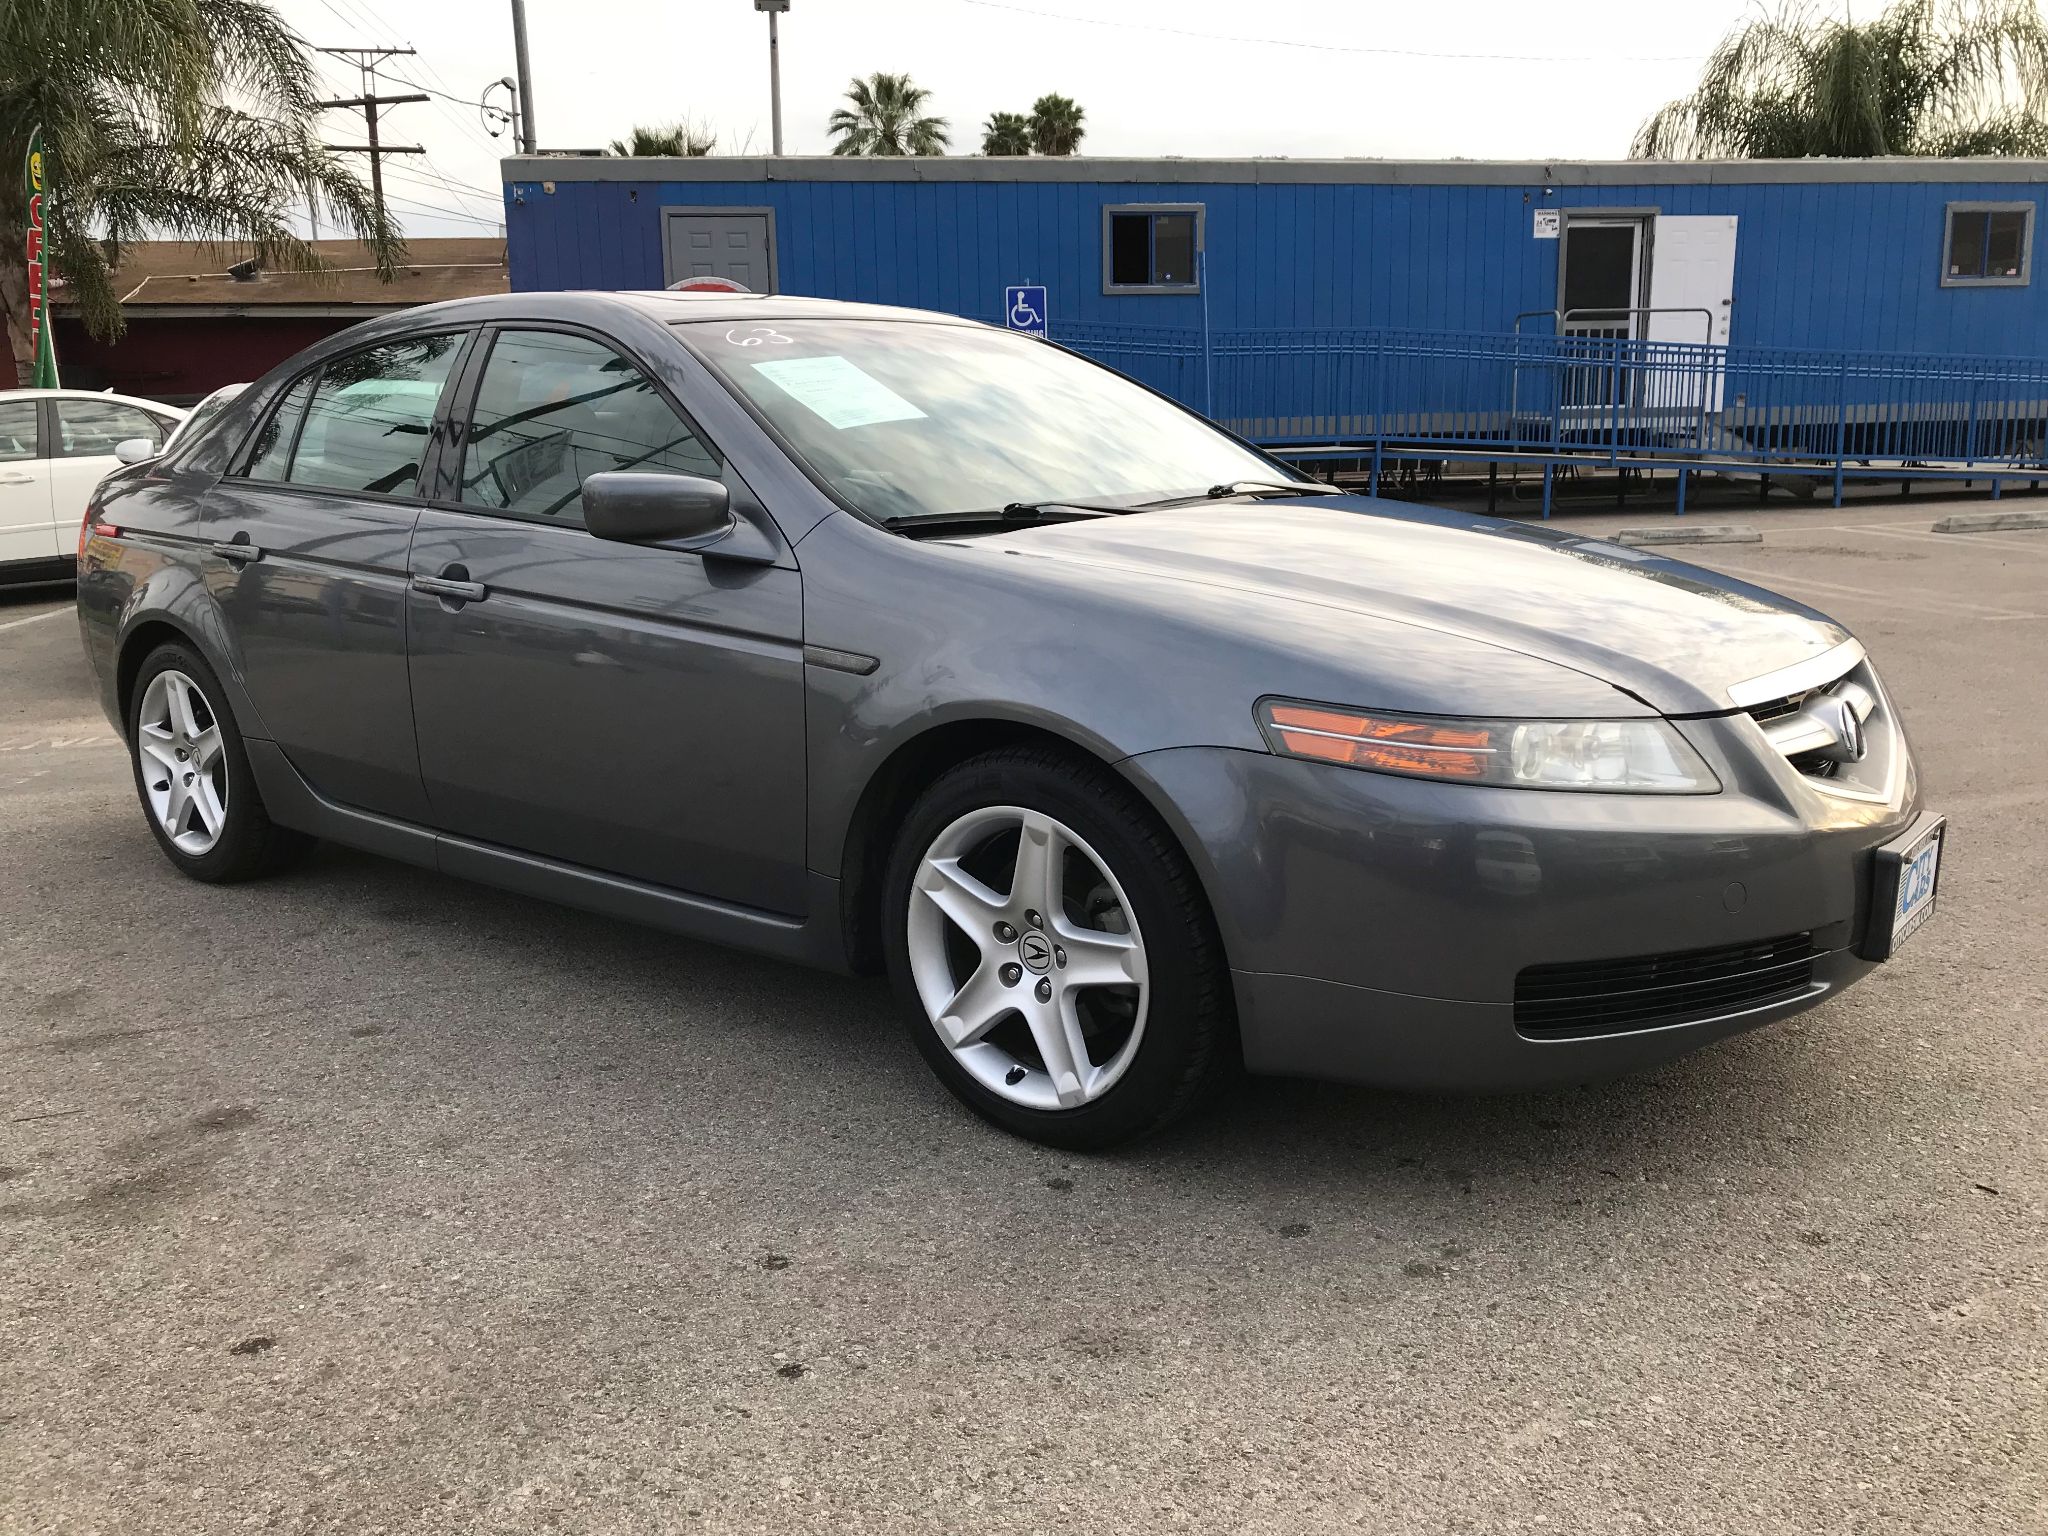 Used 2005 Acura Tl Limited Edition Super Clean Car At City Cars Warehouse Inc